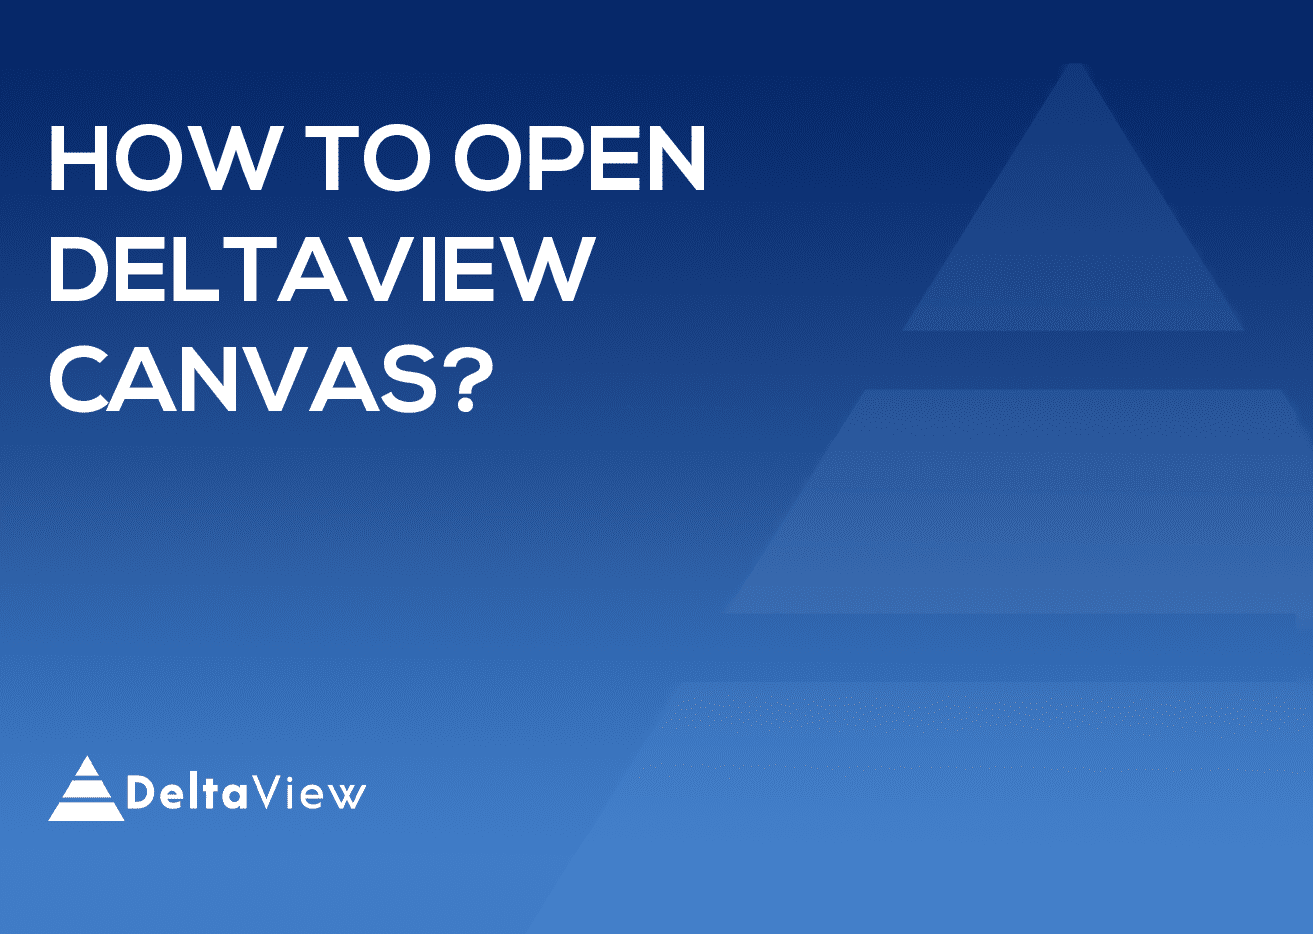 How to open DeltaView Canvas?